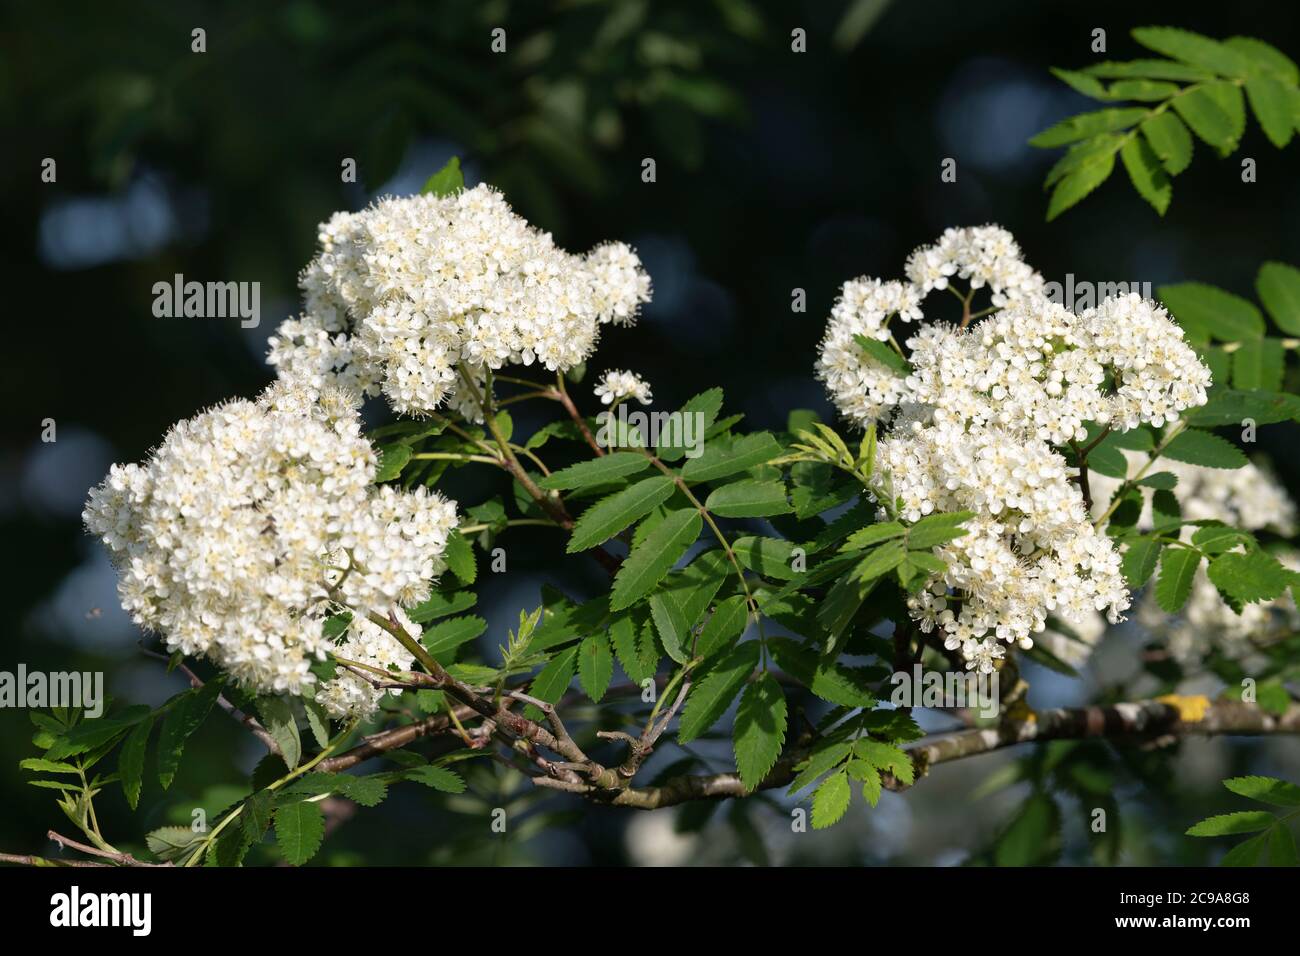 Umbels of Flowers and Foliage on a Rowan (Sorbus Aucuparia) in Summer Sunshine Stock Photo